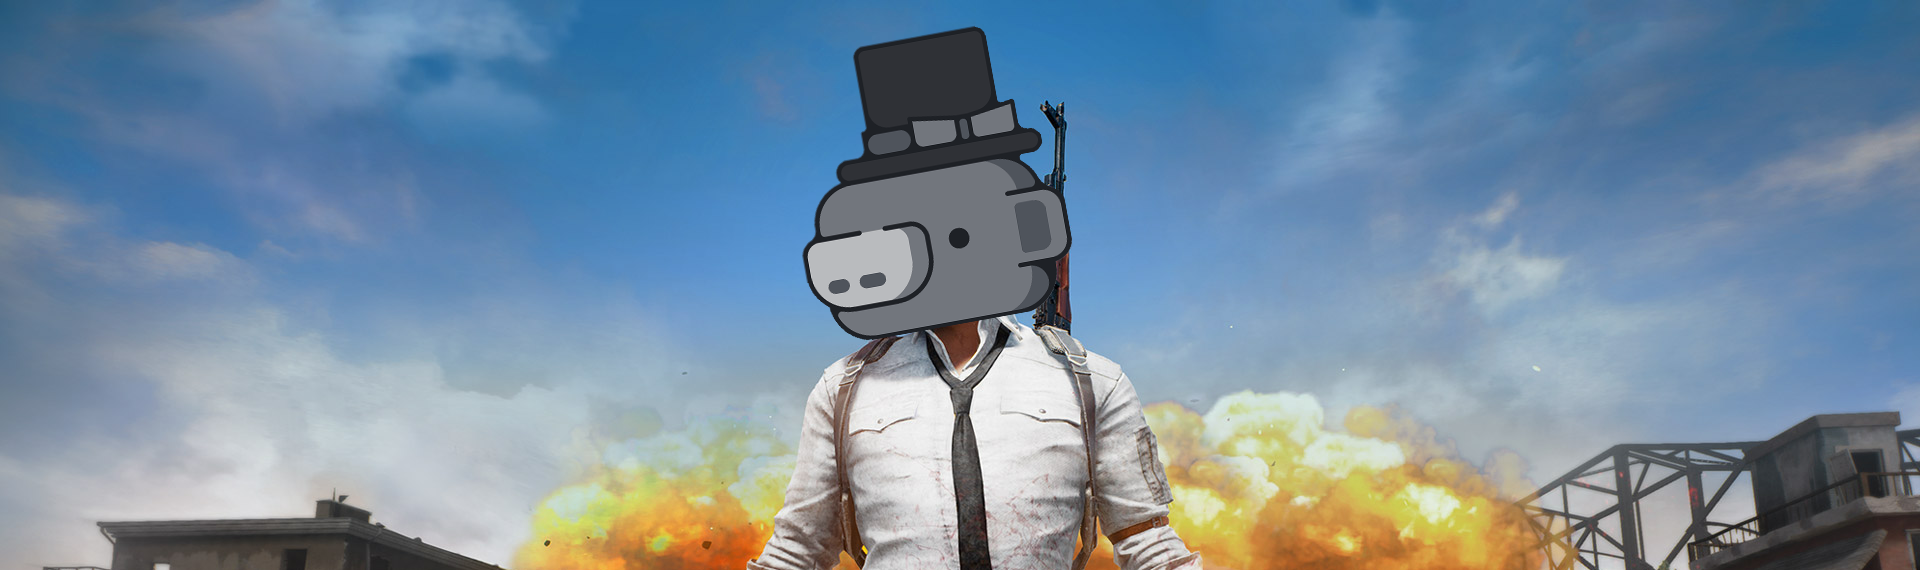 5 Great Discord Bots For Pubg Chatbots Life - 5 great discord bots for pubg